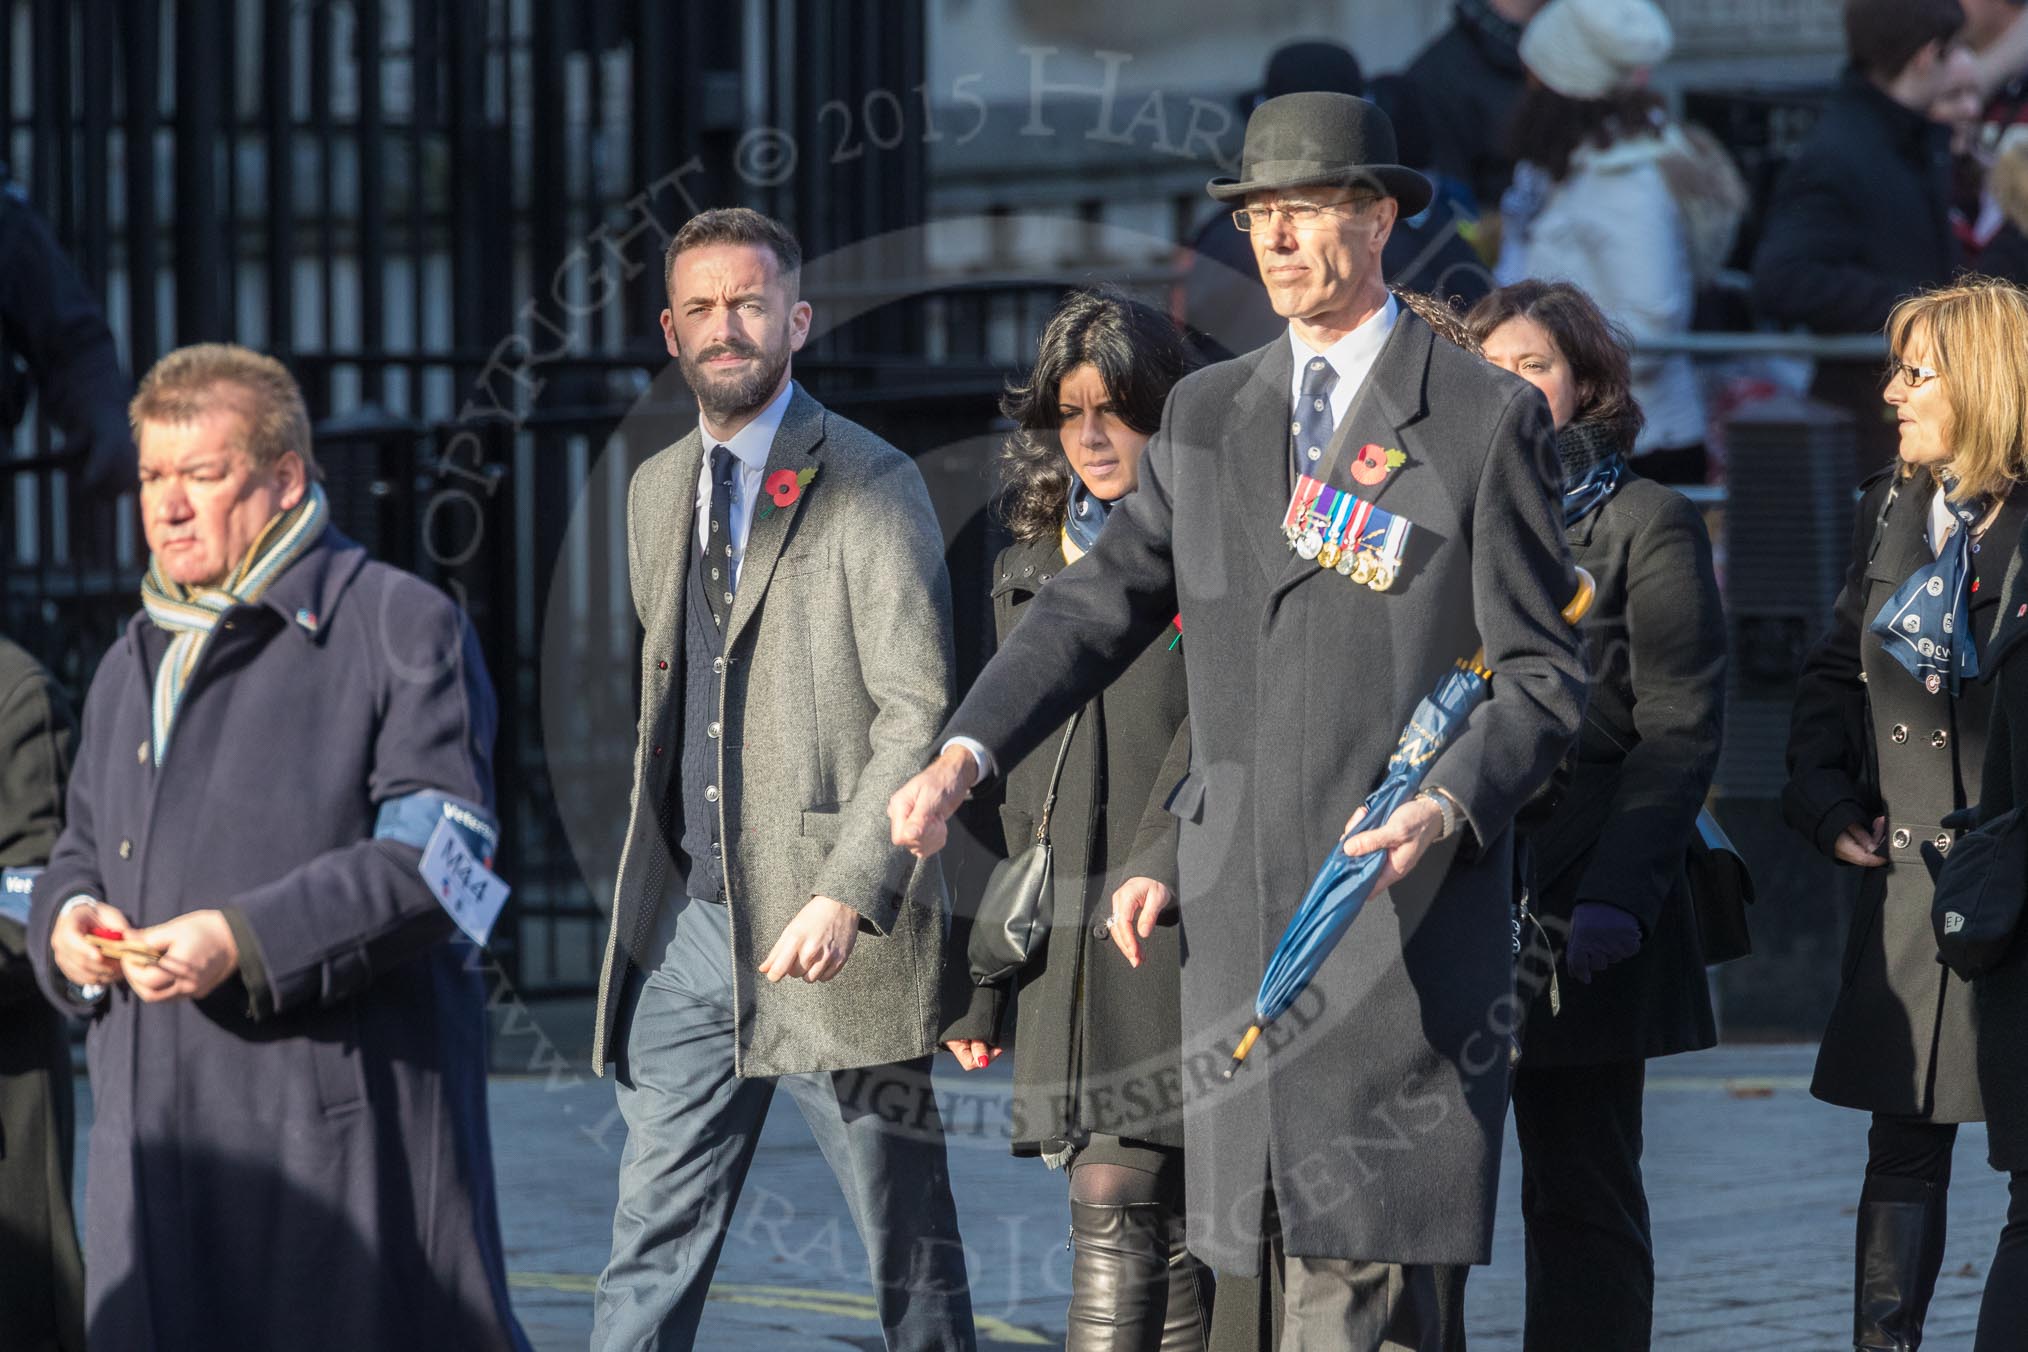 March Past, Remembrance Sunday at the Cenotaph 2016: M44 Veterans of War.
Cenotaph, Whitehall, London SW1,
London,
Greater London,
United Kingdom,
on 13 November 2016 at 13:19, image #2997